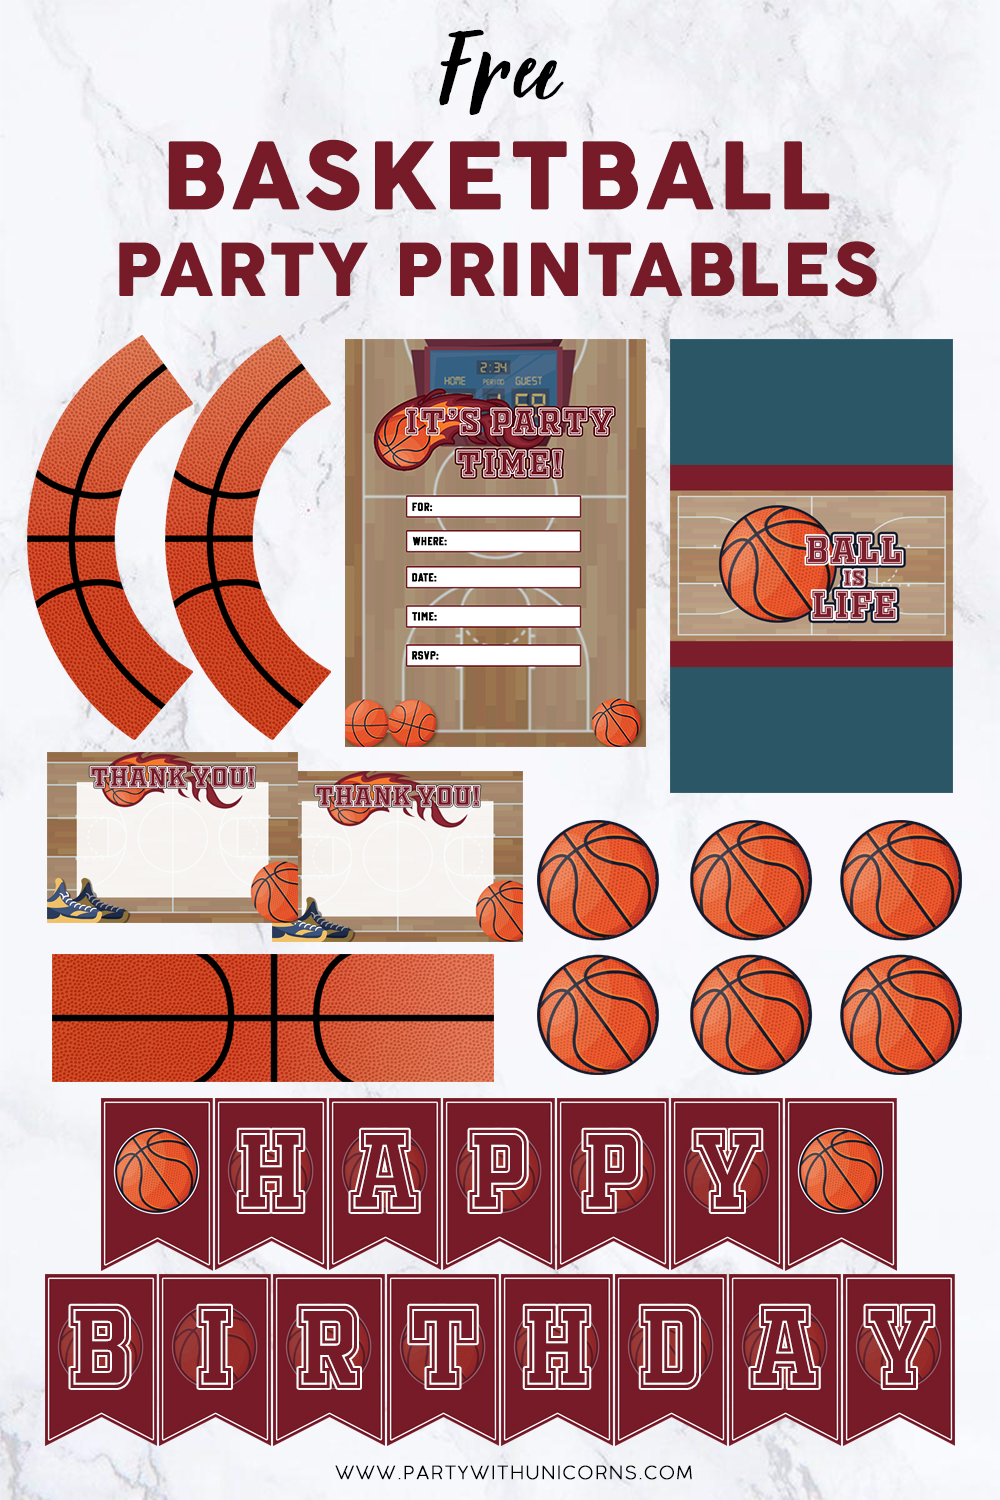 Included in basketball party printable set